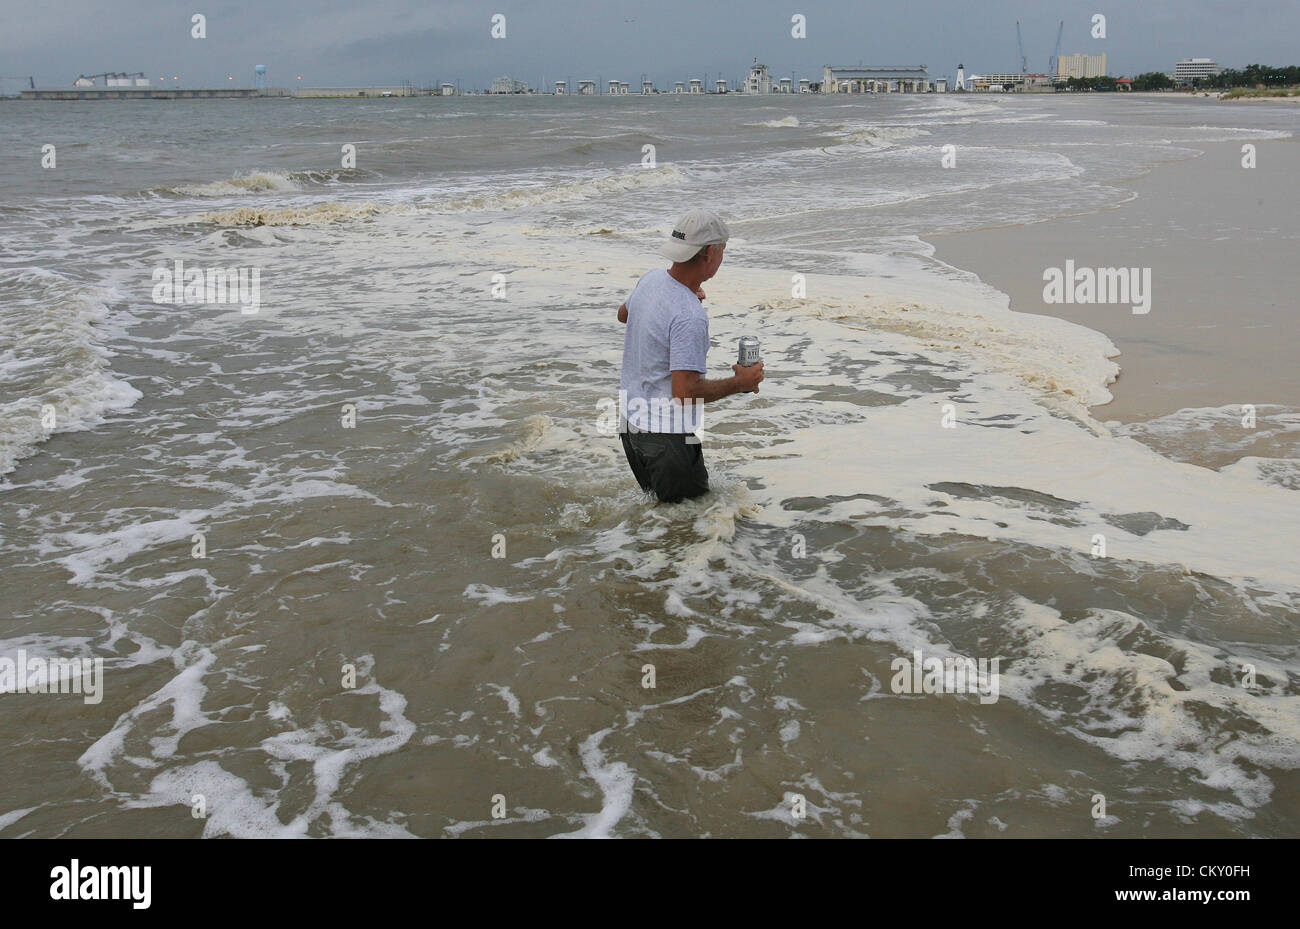 Aug. 28, 2012 - Gulfport, MISSISSIPPI, USA - Storm clouds from Hurricane Isaac come in as Paul MacNeil walks the beach in Gulfport, Mississippi, USA on August 28, 2012. Hurricane Isaac will make landfall as a Category 1 Hurricane. (Credit Image: © Dan Anderson/ZUMAPRESS.com) Stock Photo